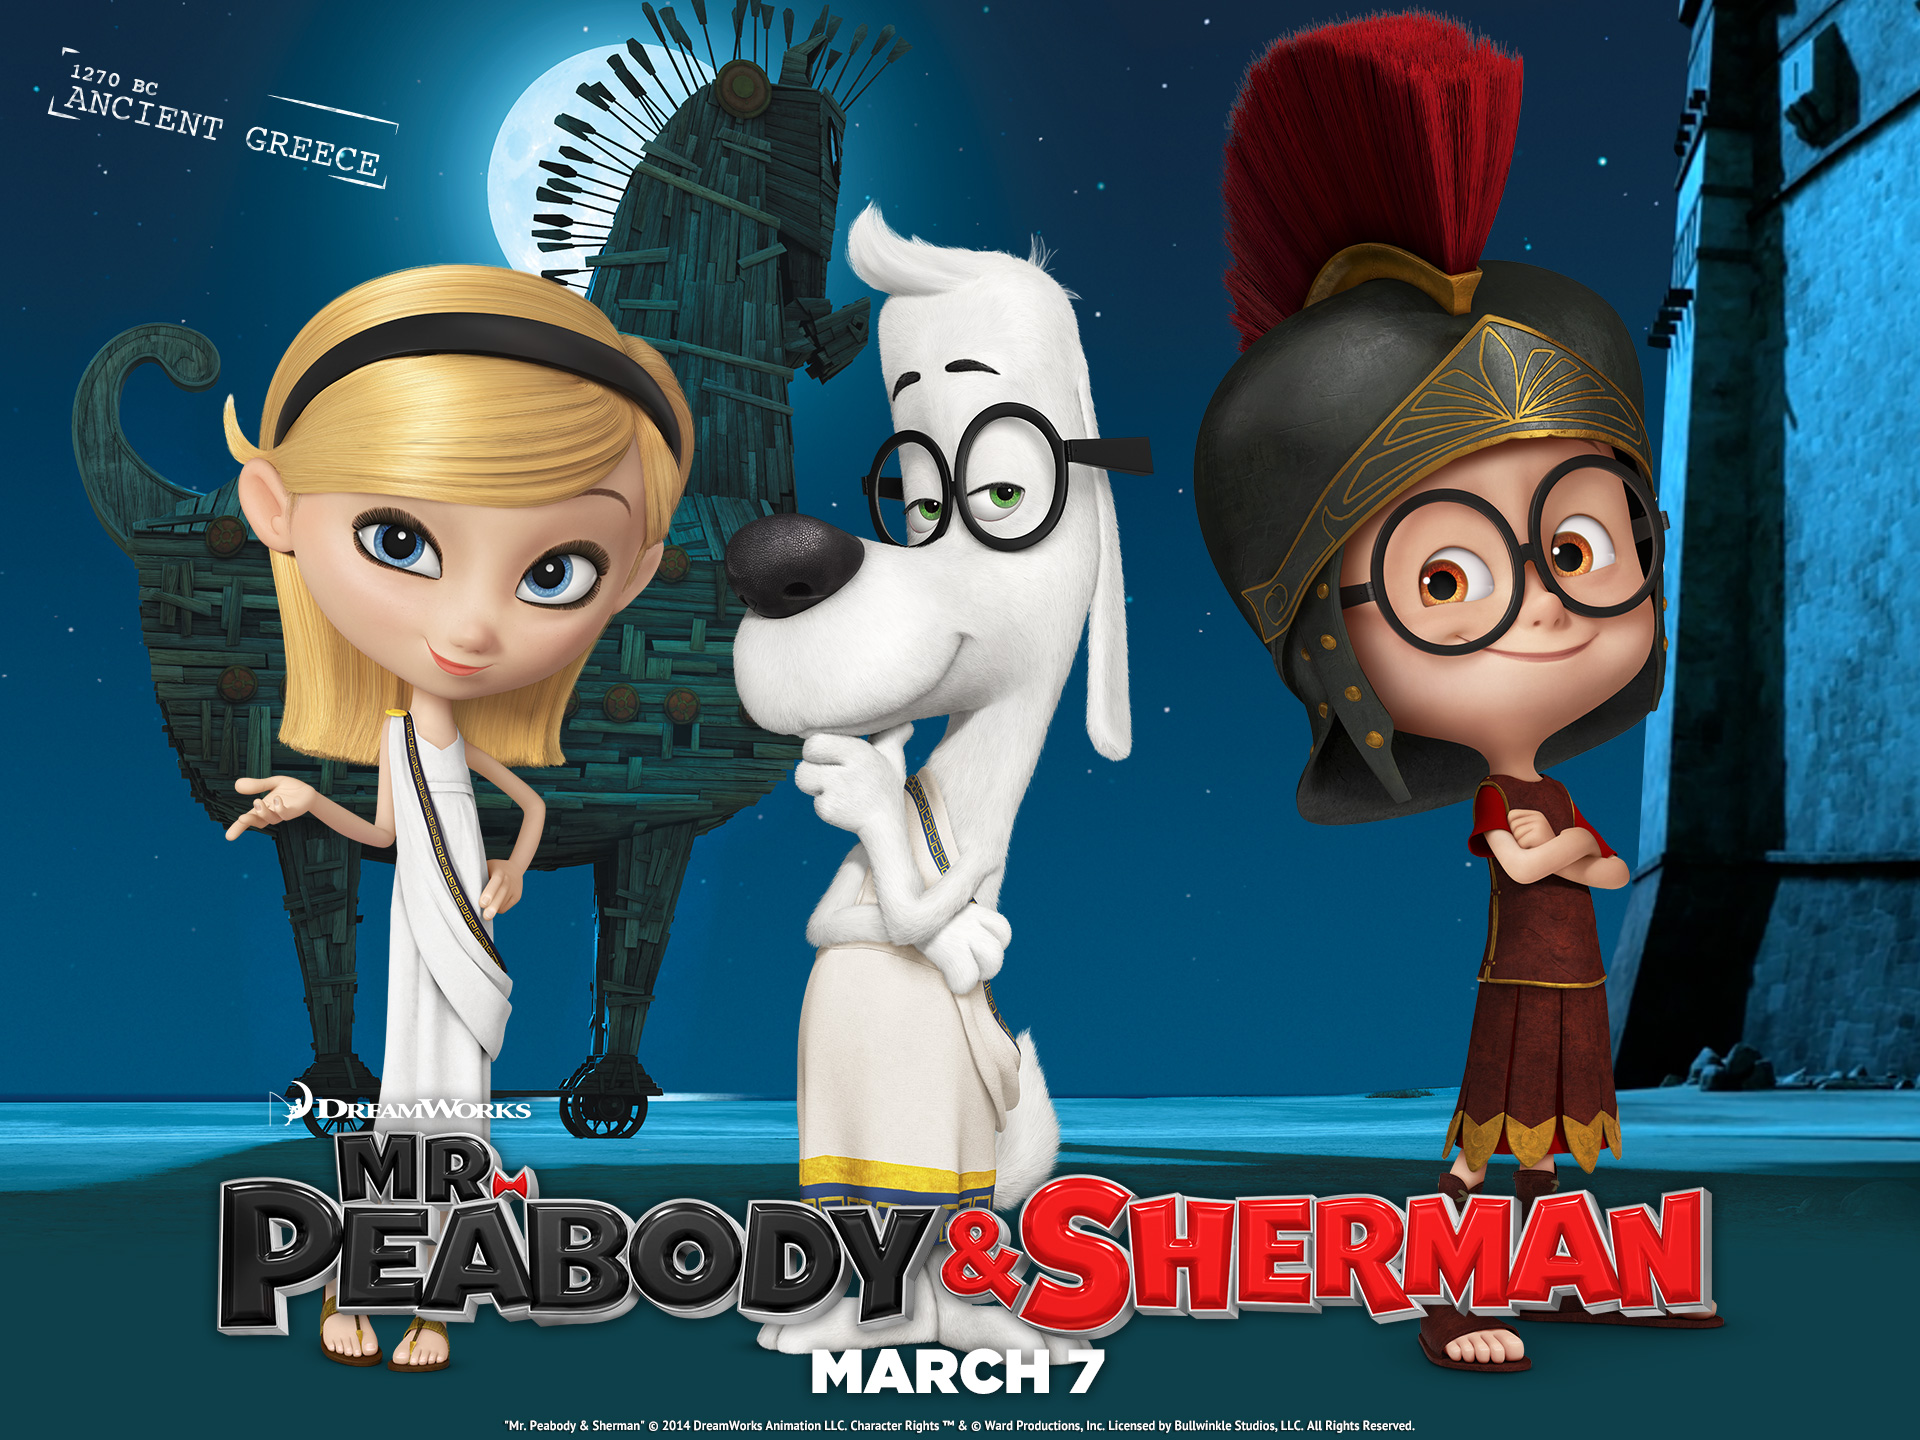 Mr. Peabody and Sherman in Ancient Greece Wallpaper.